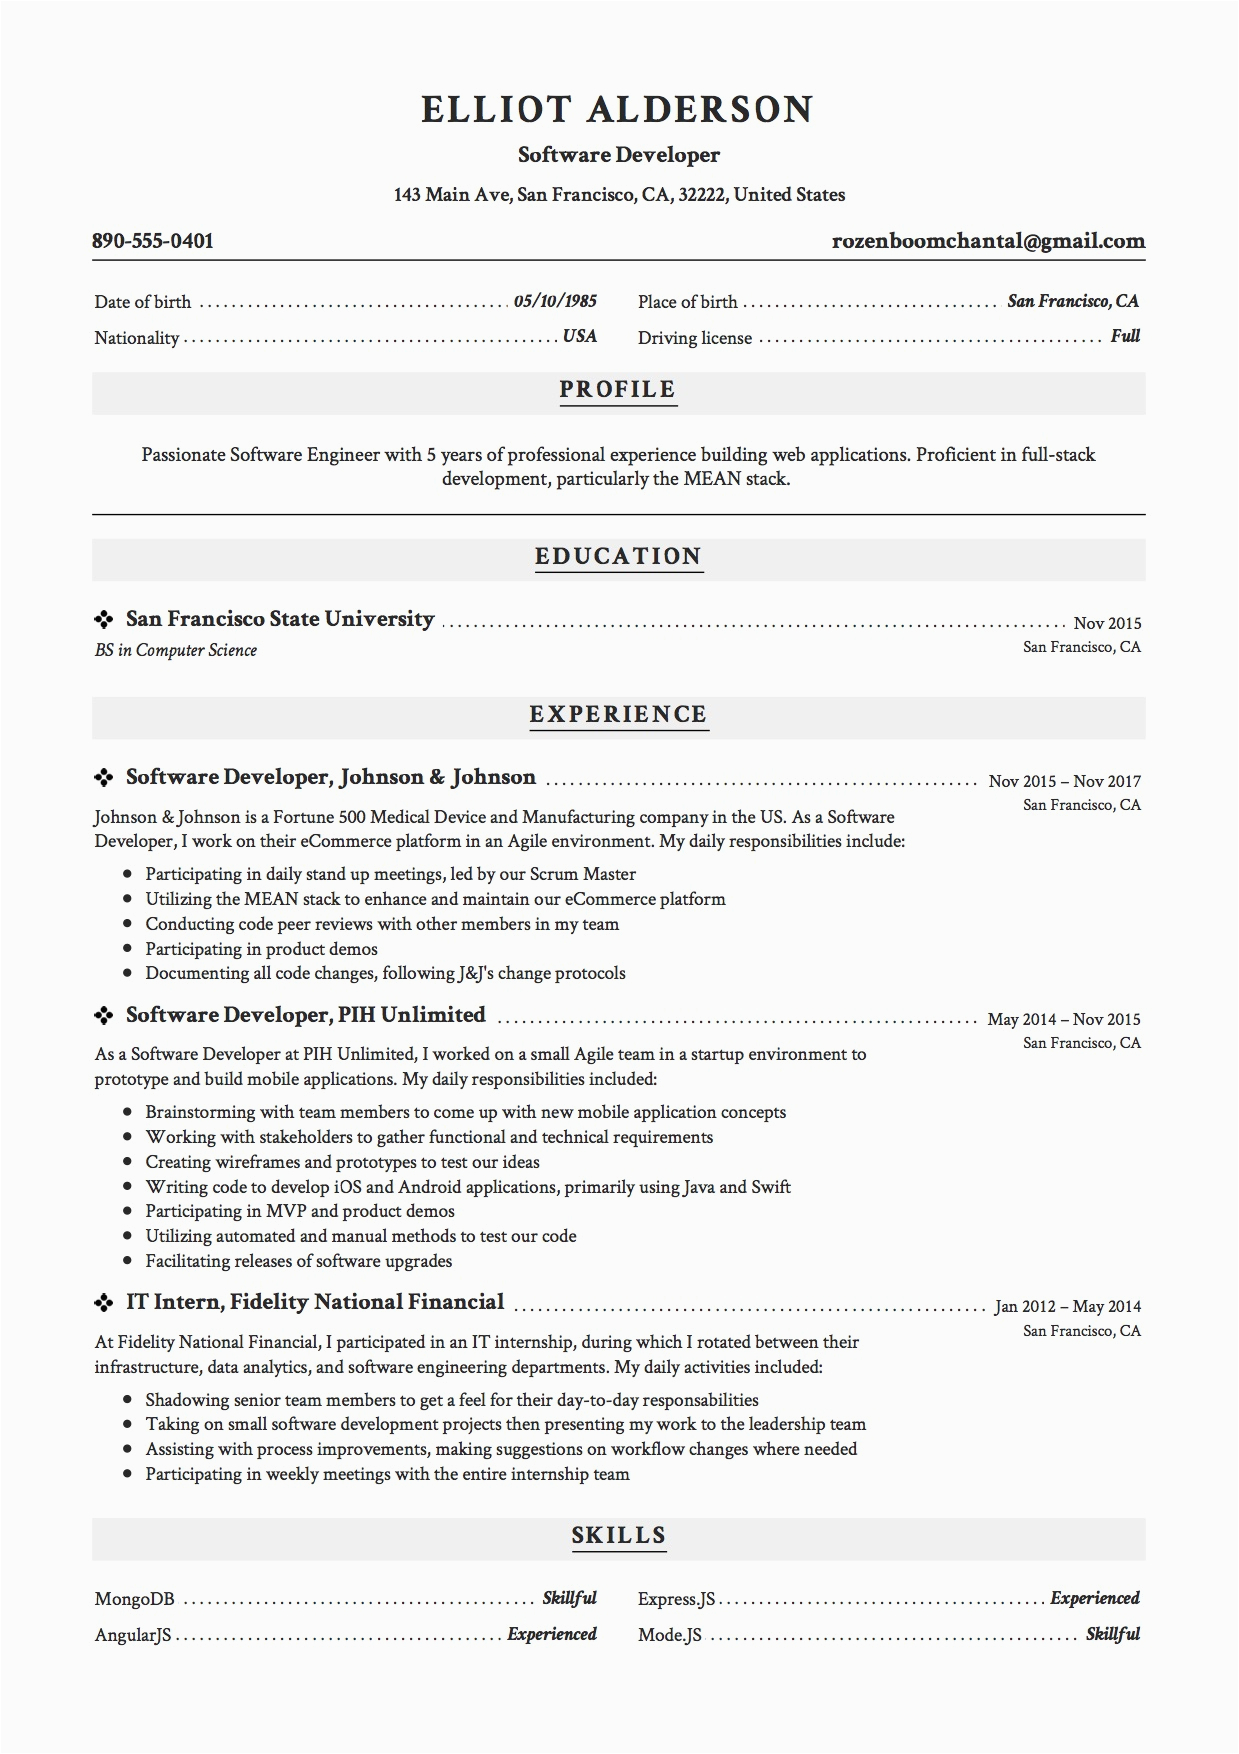 Sample Resume for Experienced software Engineer Sample Resume for software Engineer with 3 Years